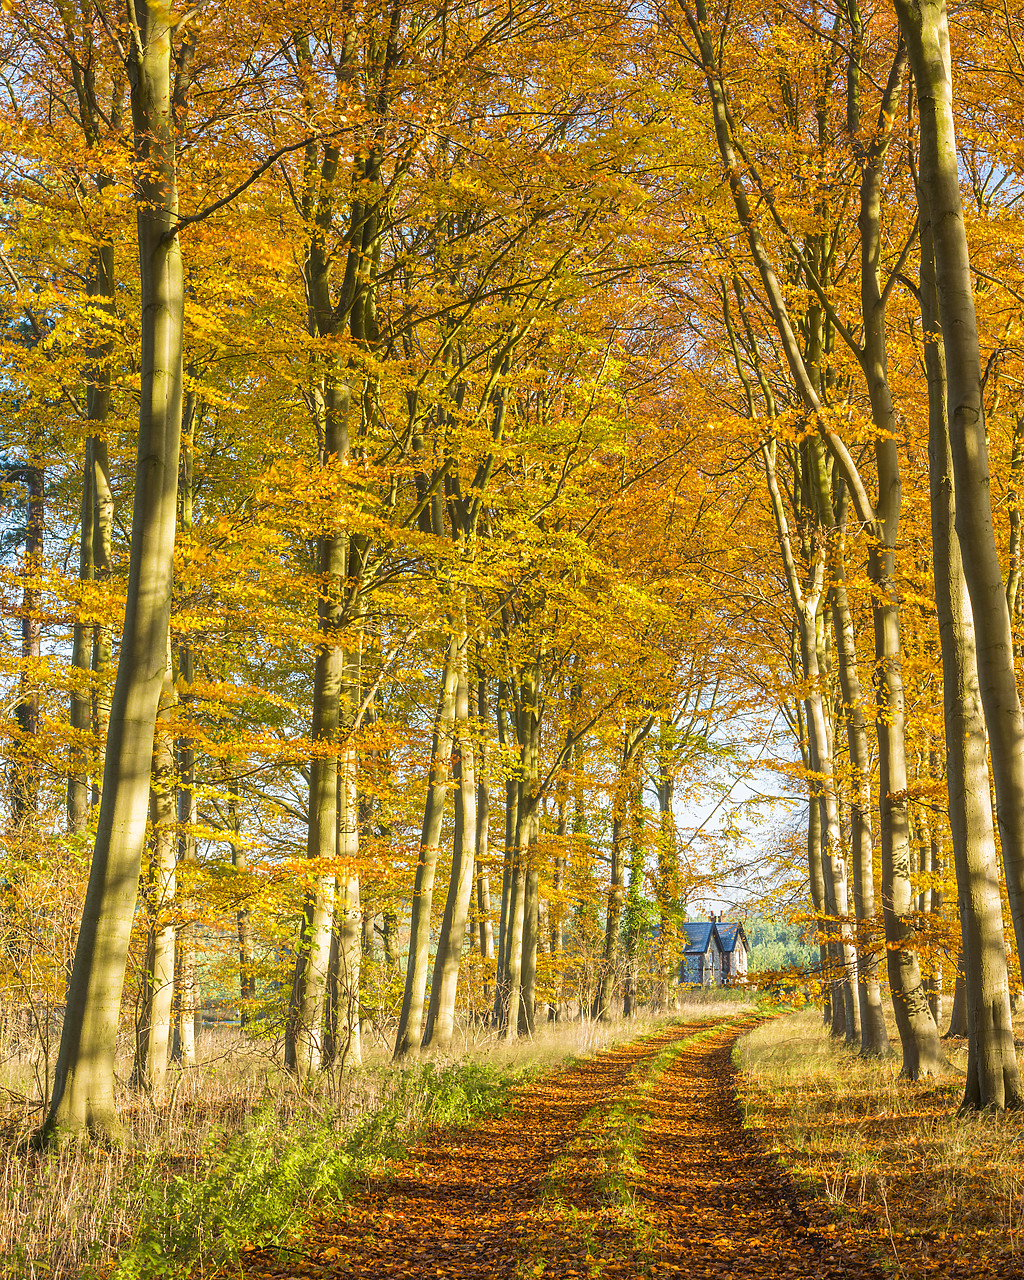 #130405-1 - Country Lane Leading to Cottage in Autumn, Thetford Forest, Norfolk, England